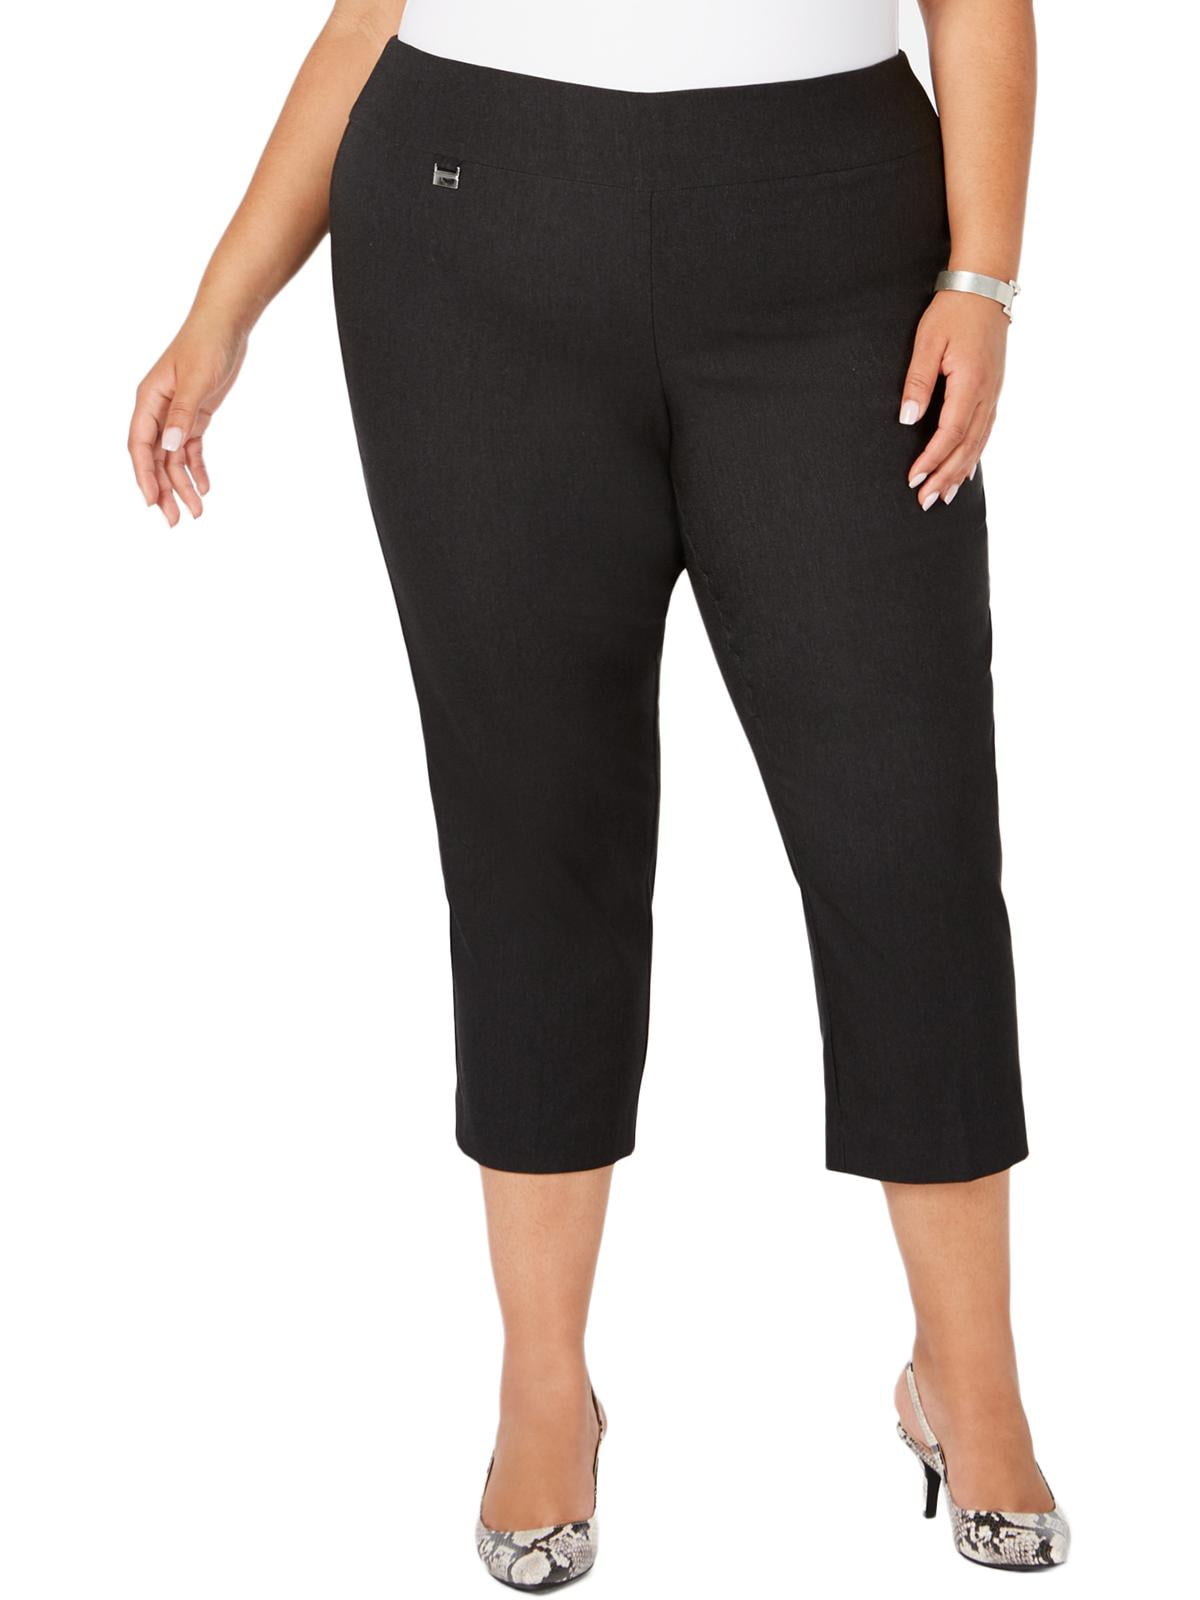 Just My Size Women's Plus 2 Pocket Pull-On Pant 